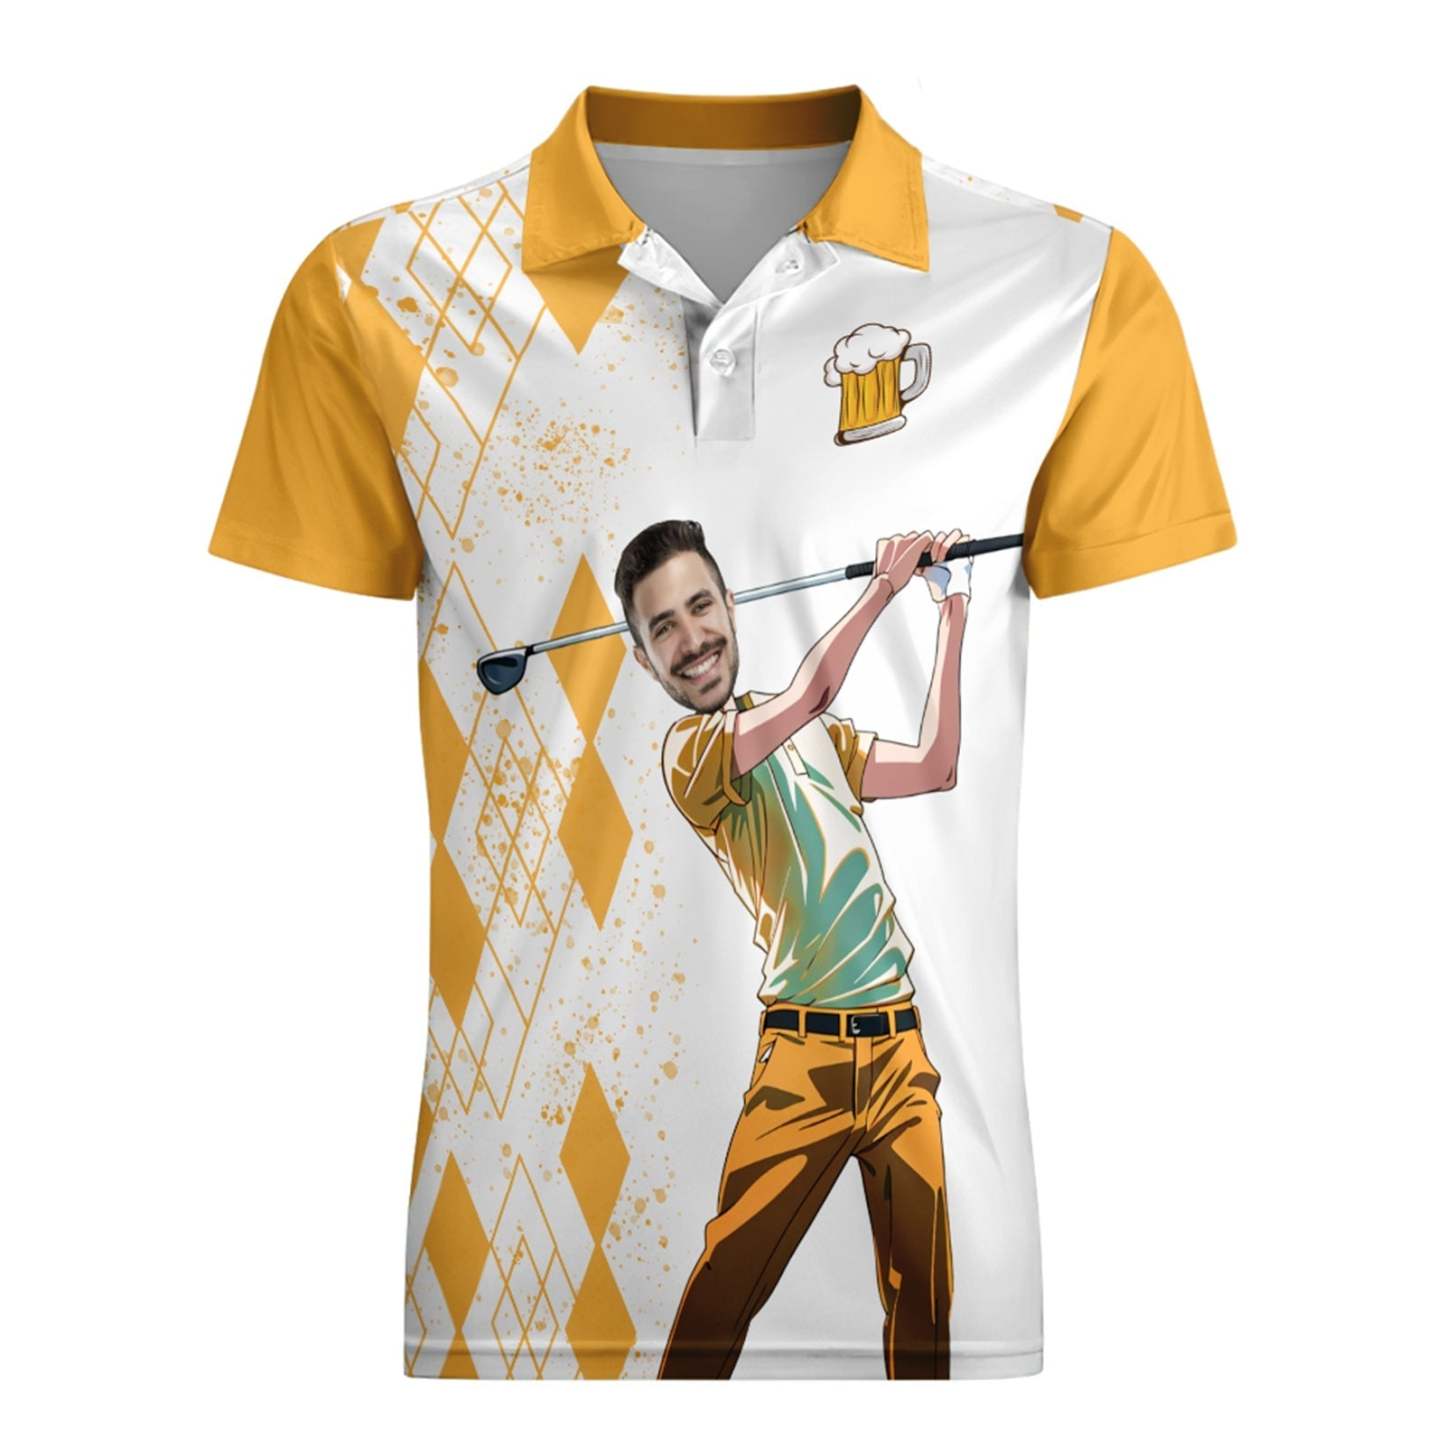 Custom Face Polo Shirt For Men Weekend Forecast Beer And Golf Polo Shirt  For Beer Lovers - MyPhotoSocks